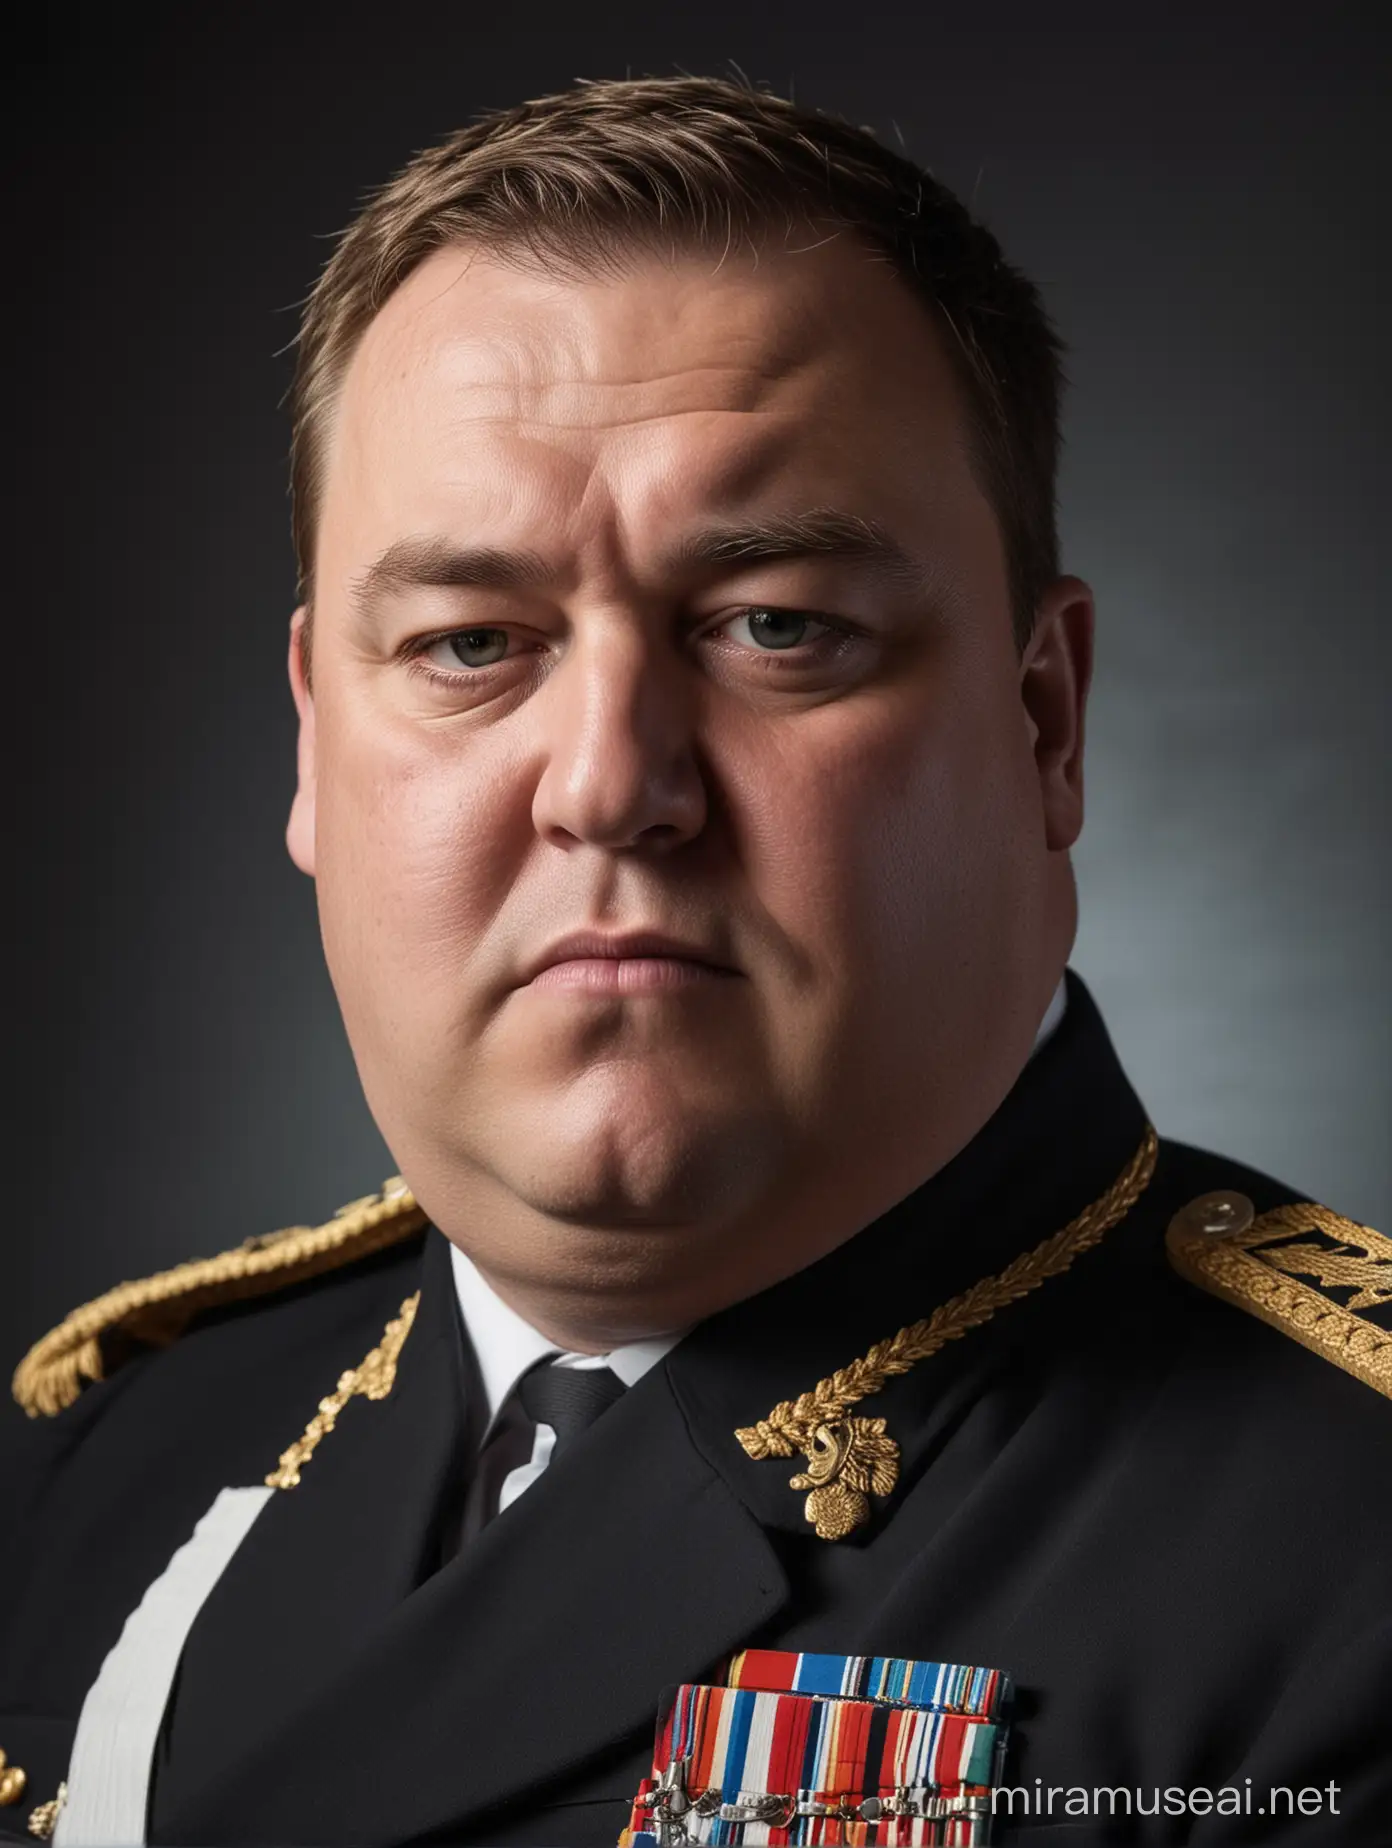 Overweight Admiral Portrait in Seated Position on Black Background